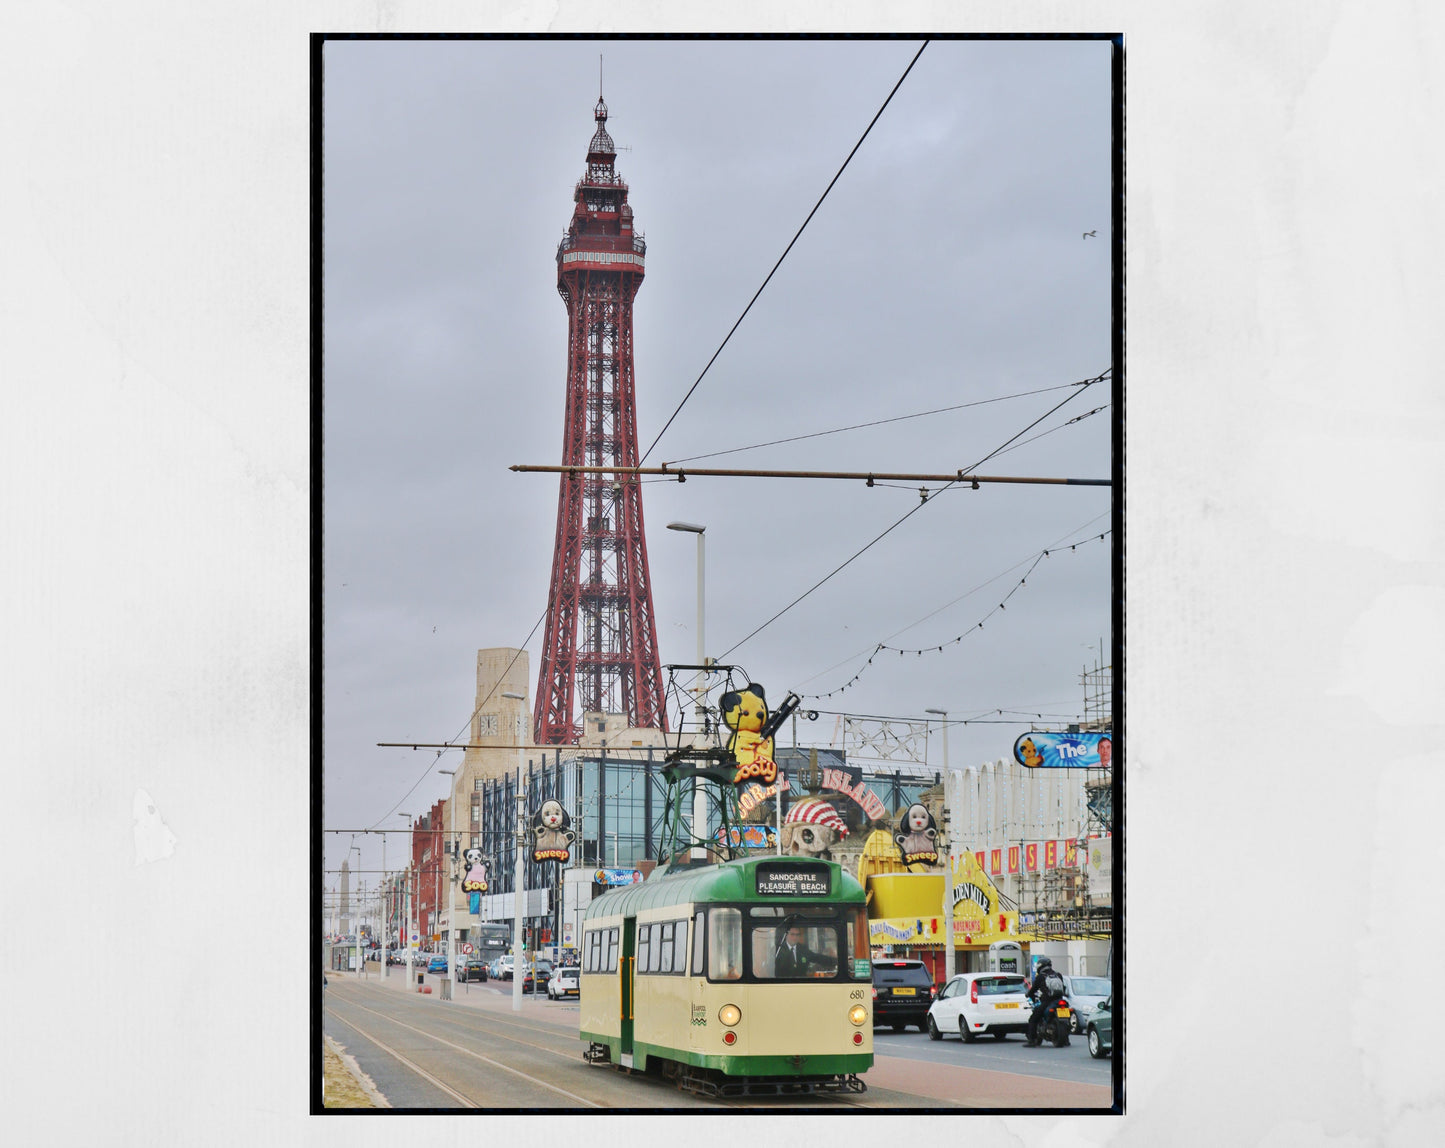 Blackpool Photography Print Blackpool Tower Tram Poster